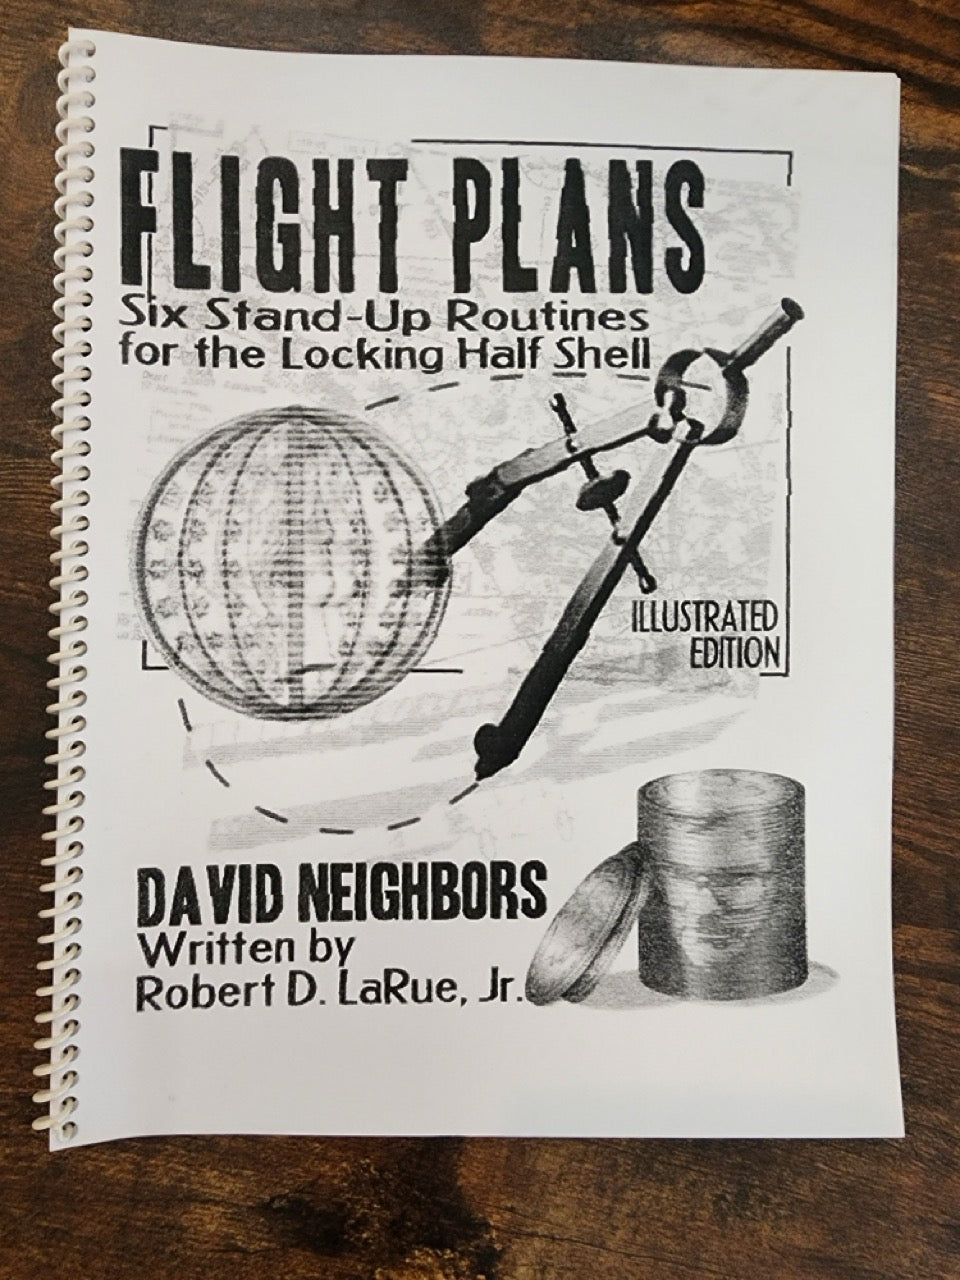 Flight Plans: Six Stand-Up Routines for the Locking Half Shell - David Neighbors